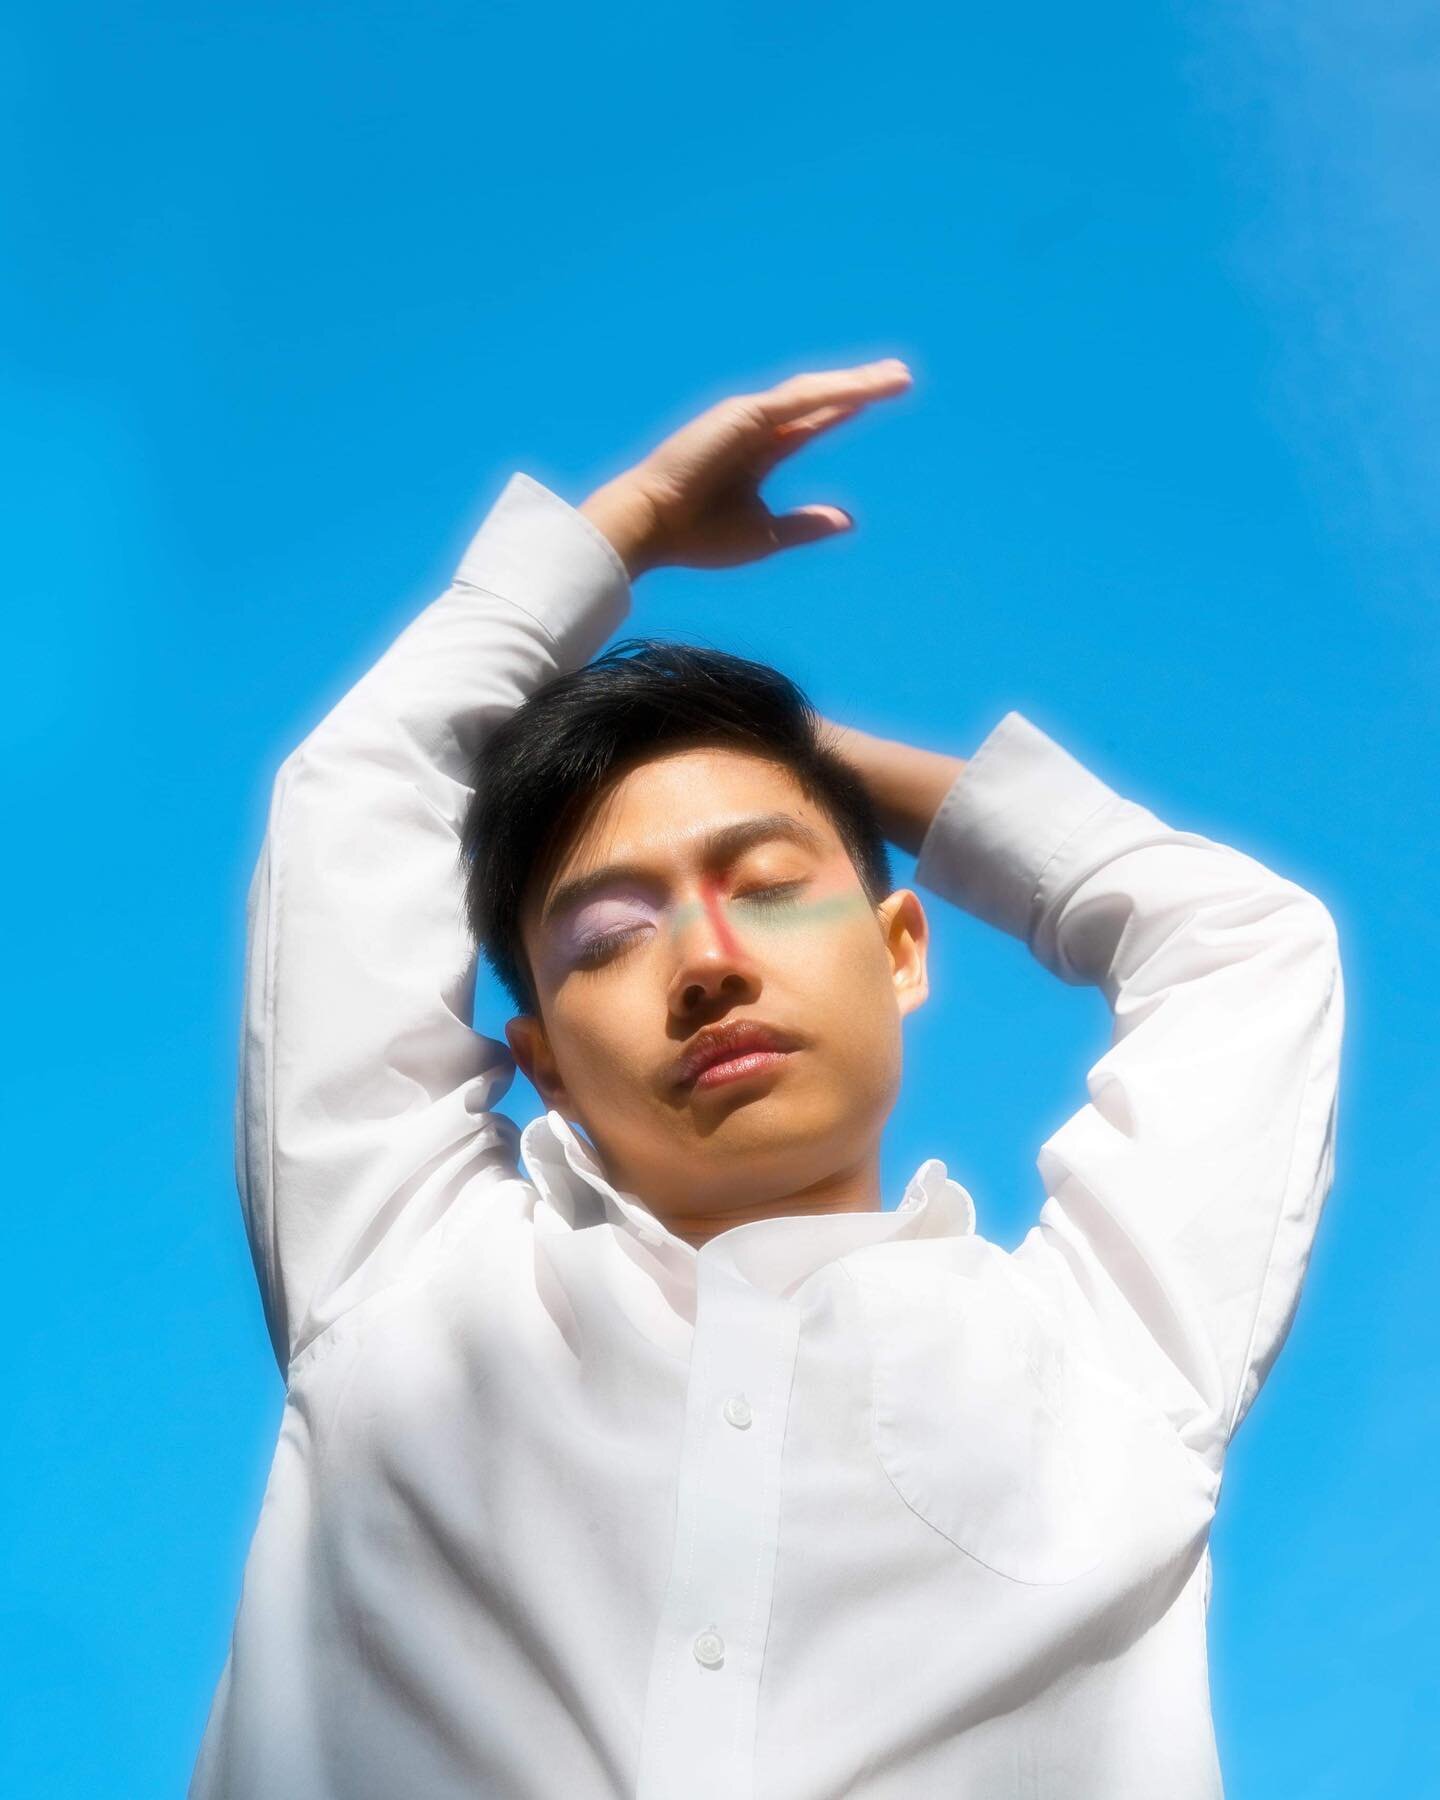 Repost: //COLOR ME BLUE a series on Asian masculinity

Photo &amp; Makeup: @joycefulee